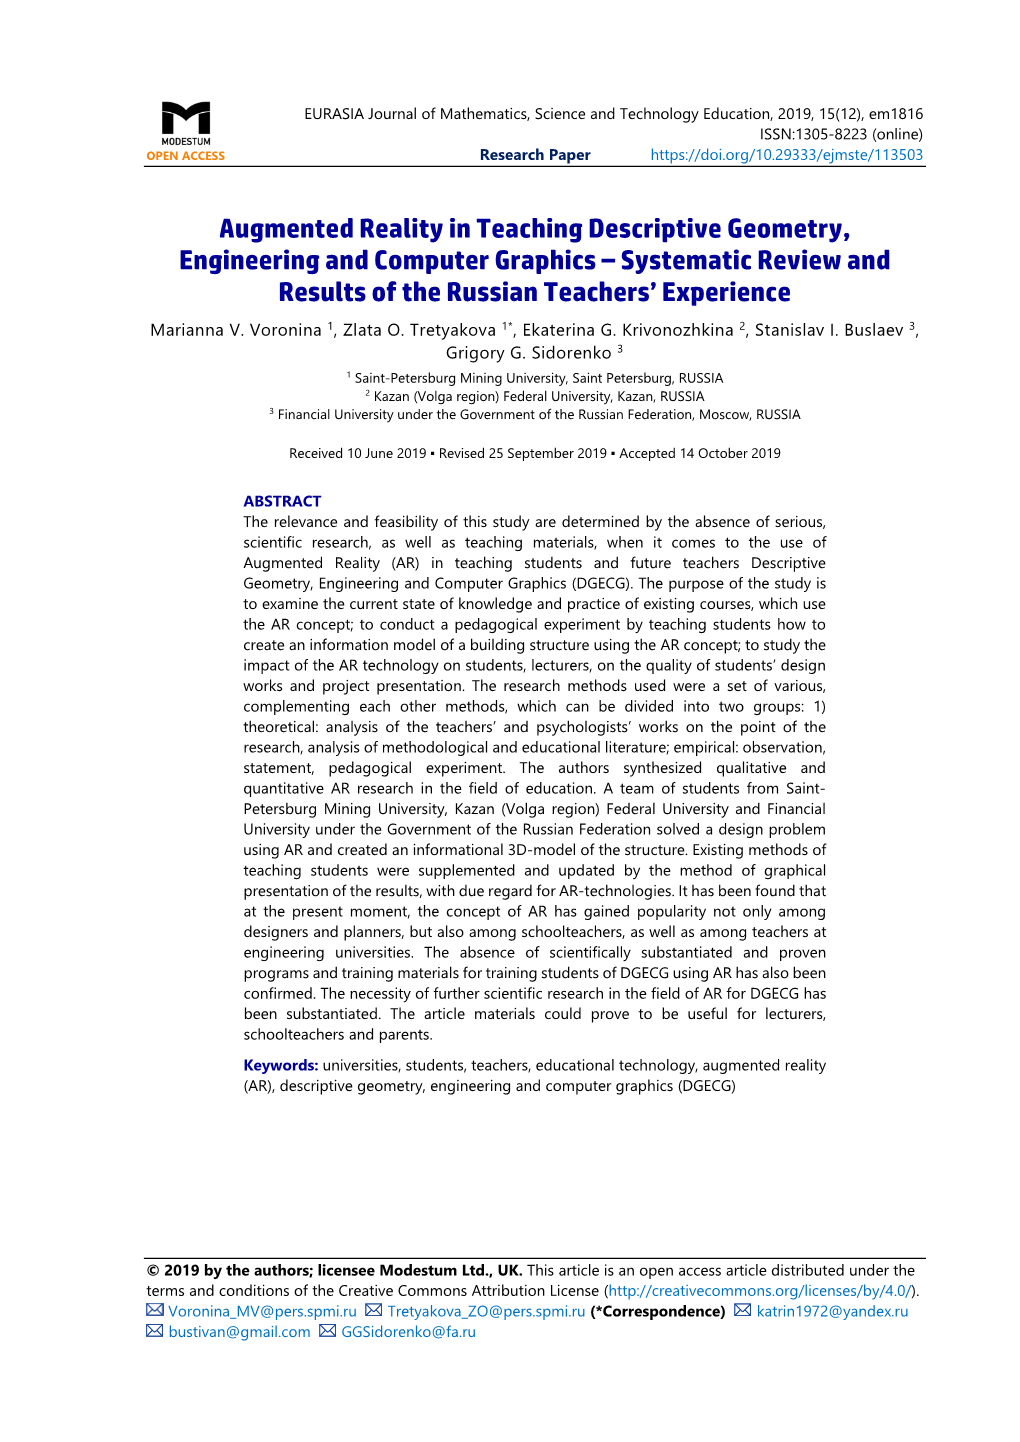 Augmented Reality in Teaching Descriptive Geometry, Engineering and Computer Graphics – Systematic Review and Results of the Russian Teachers’ Experience